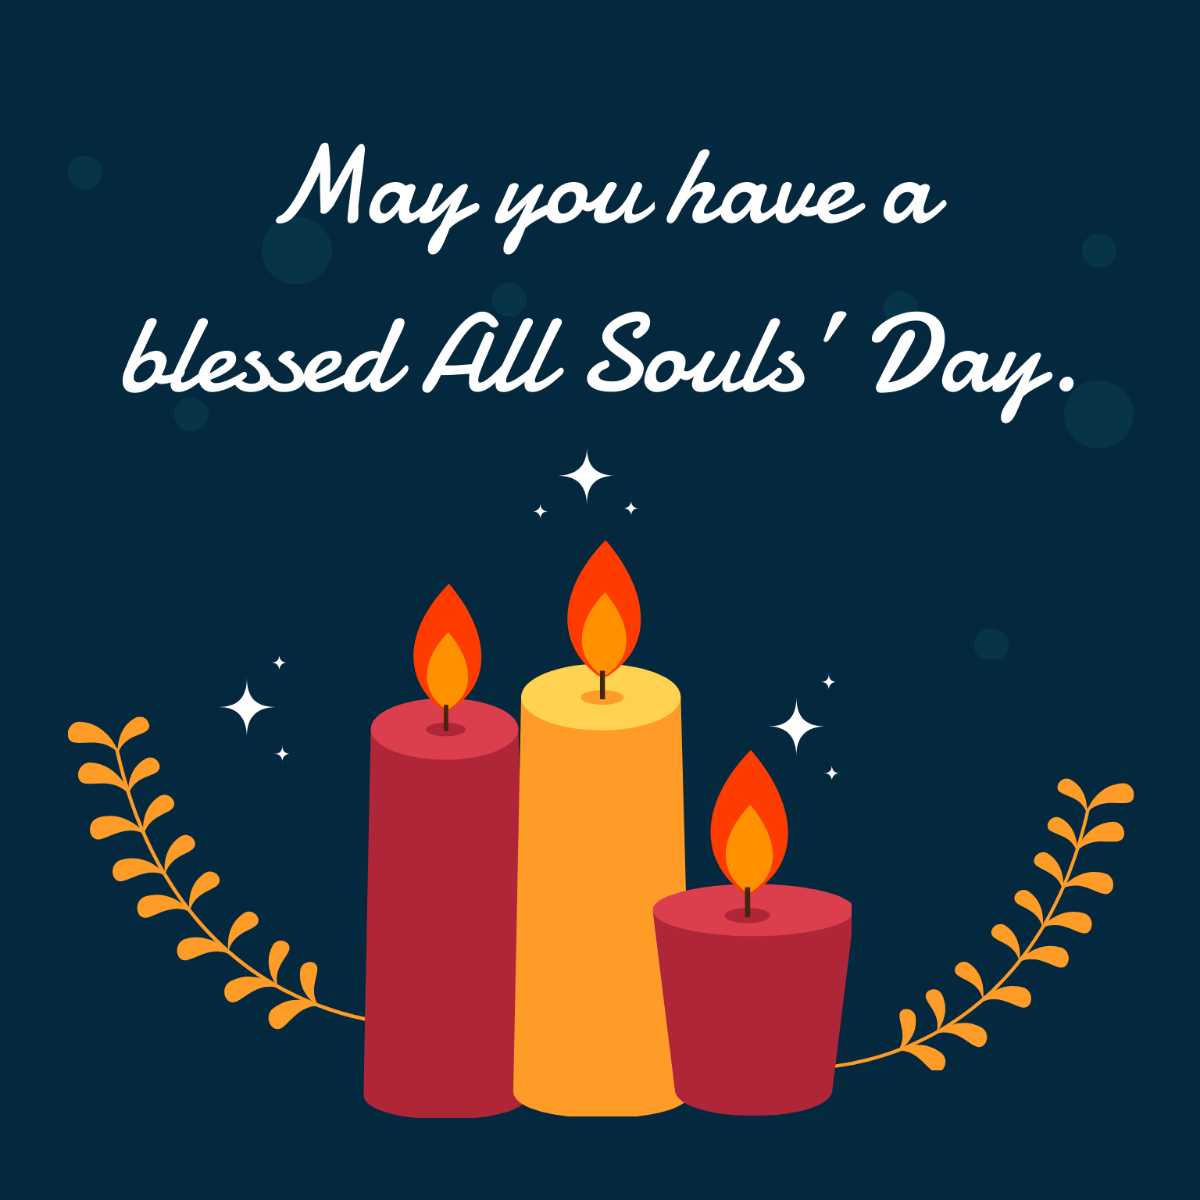 Free All Souls' Day Wishes Vector Template